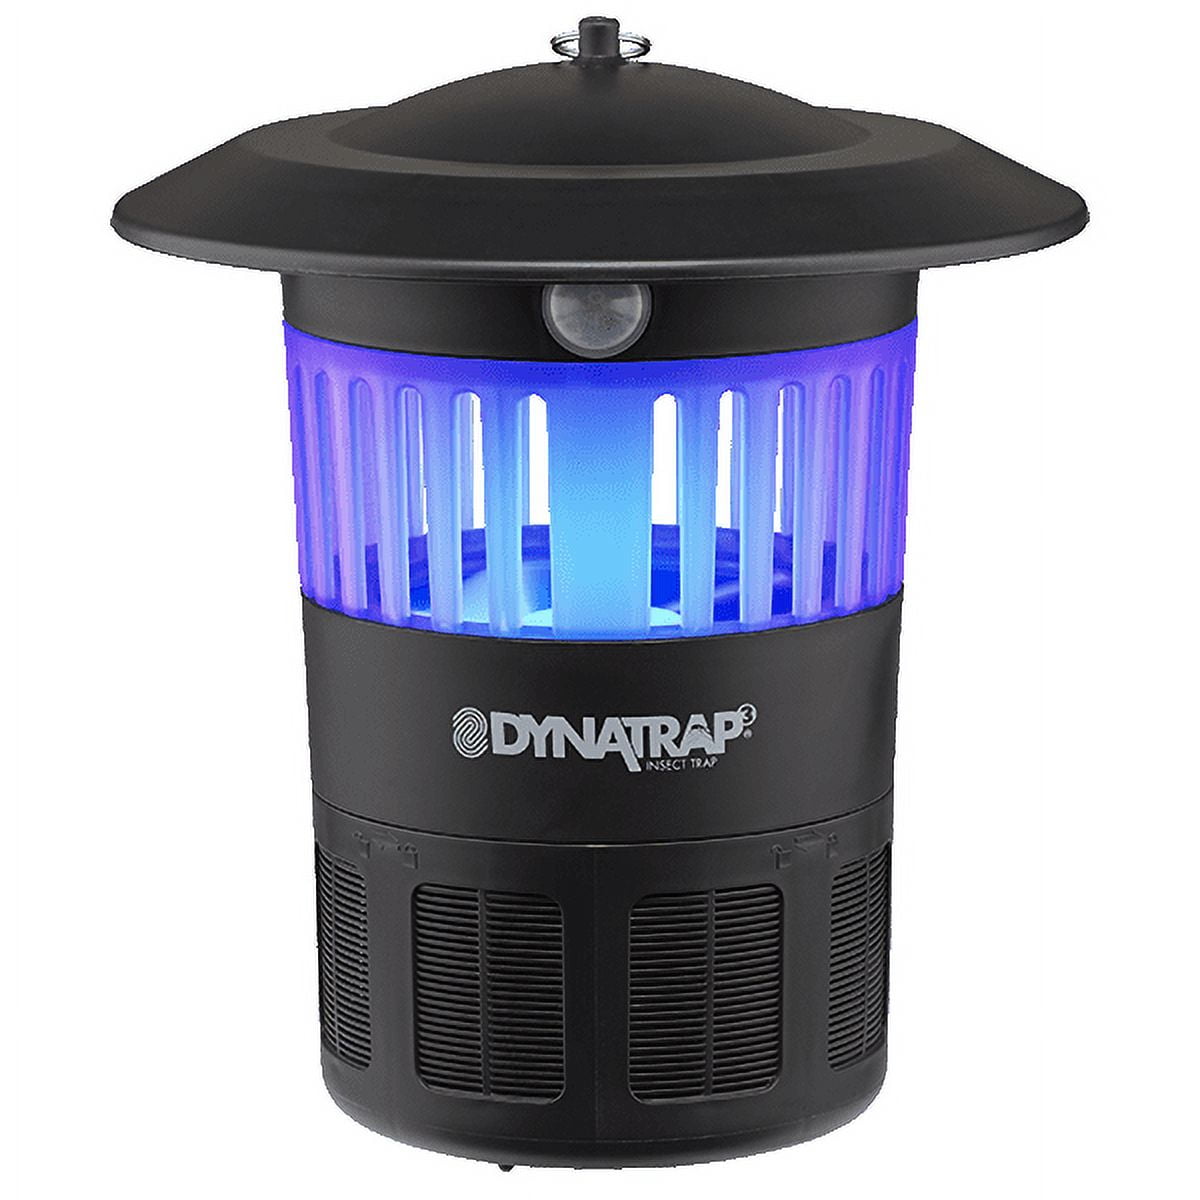 DynaTrap® ¼ Acre Mosquito & Insect Trap Kit